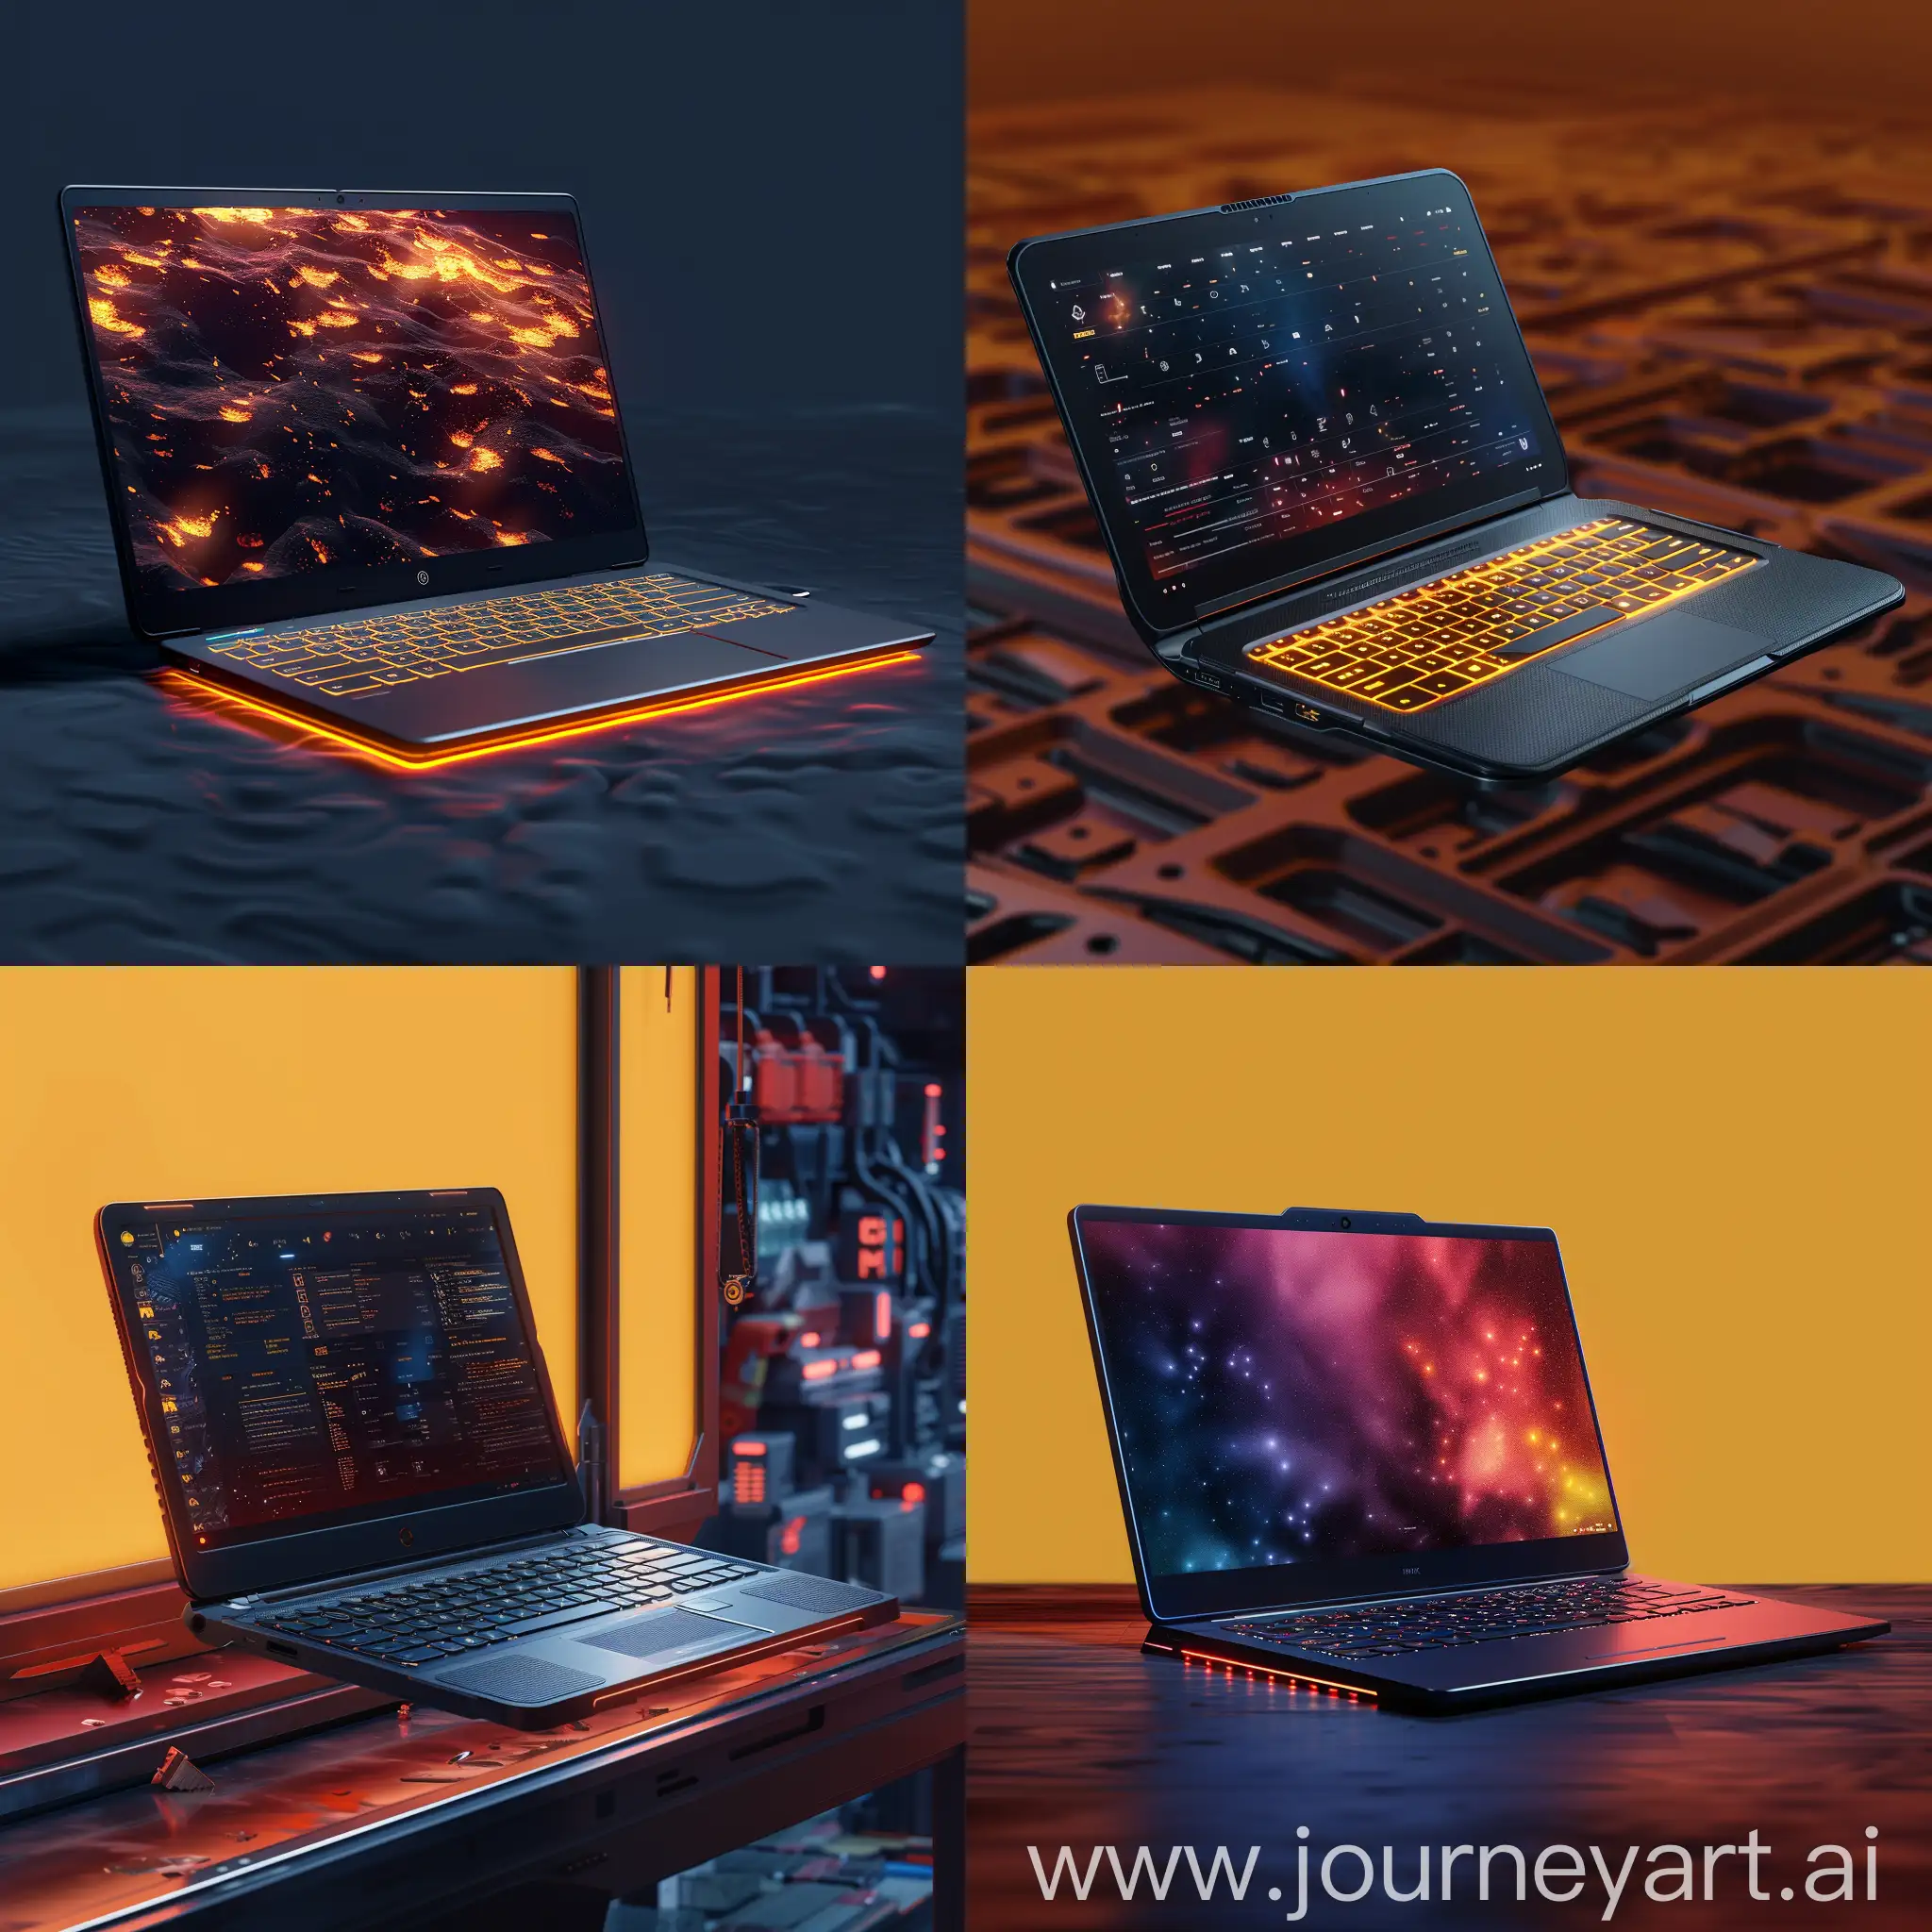 Futuristic-Laptop-with-Holographic-Display-and-Flexible-Design